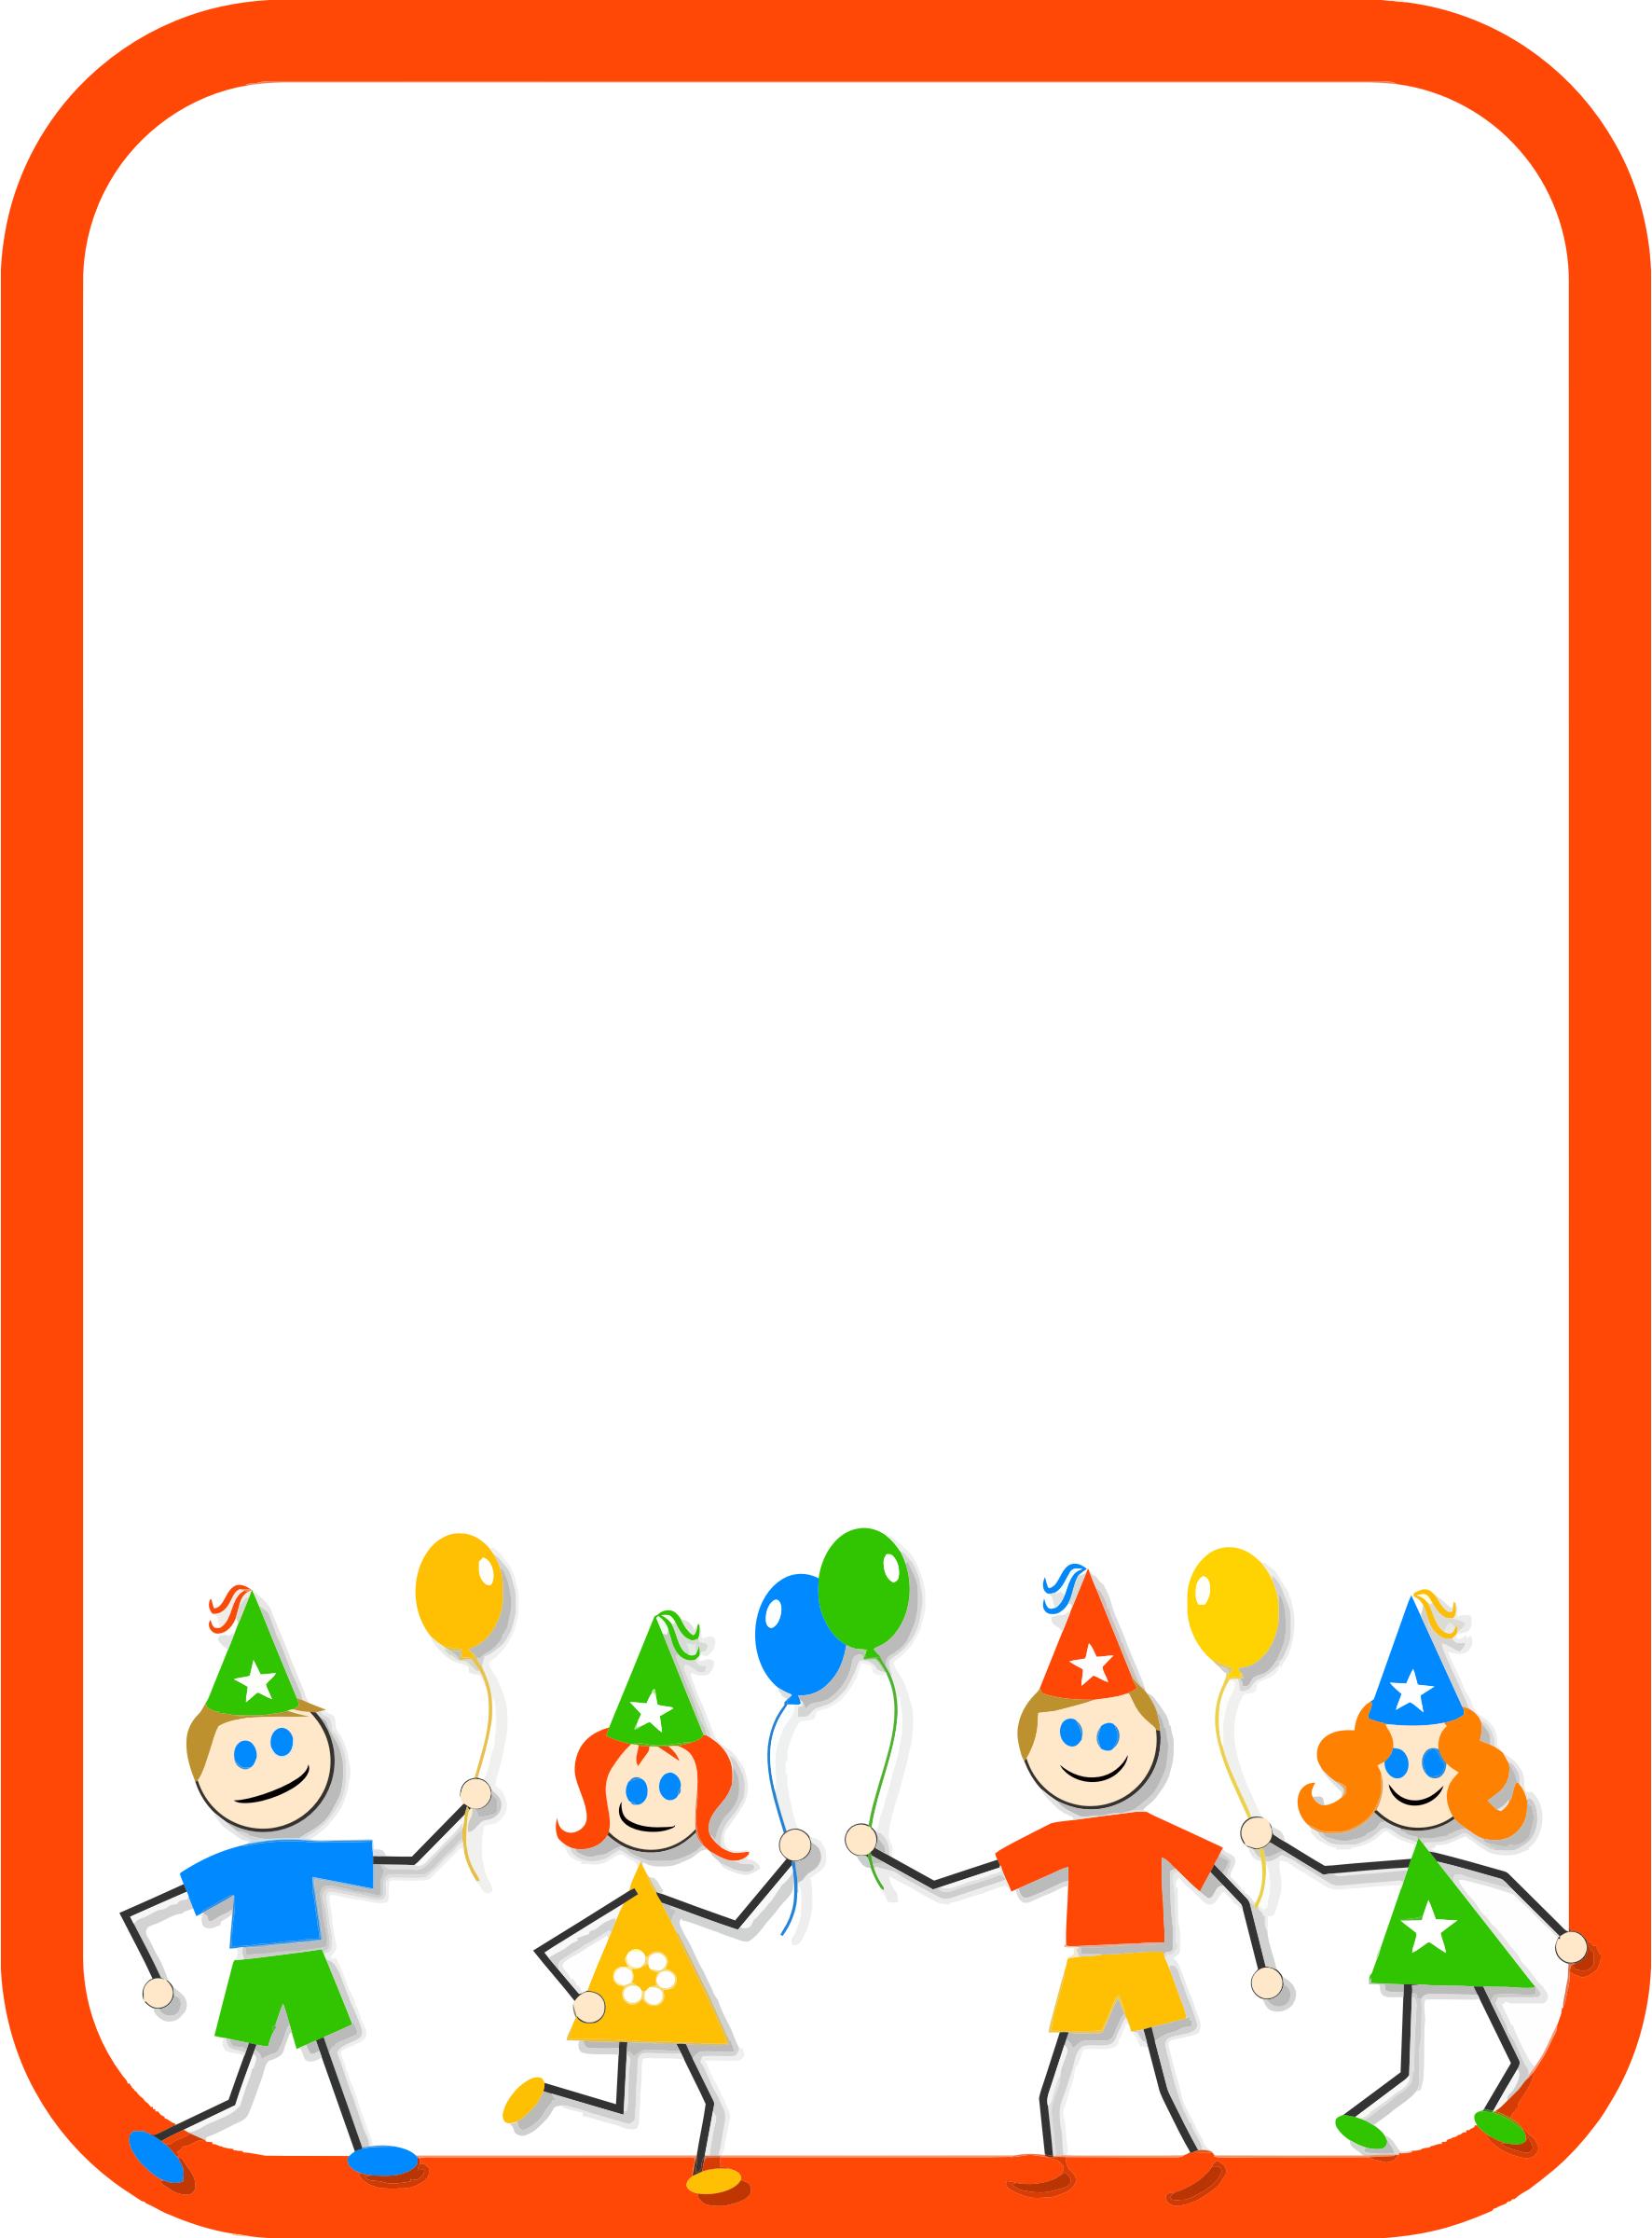 Kids Party Border png